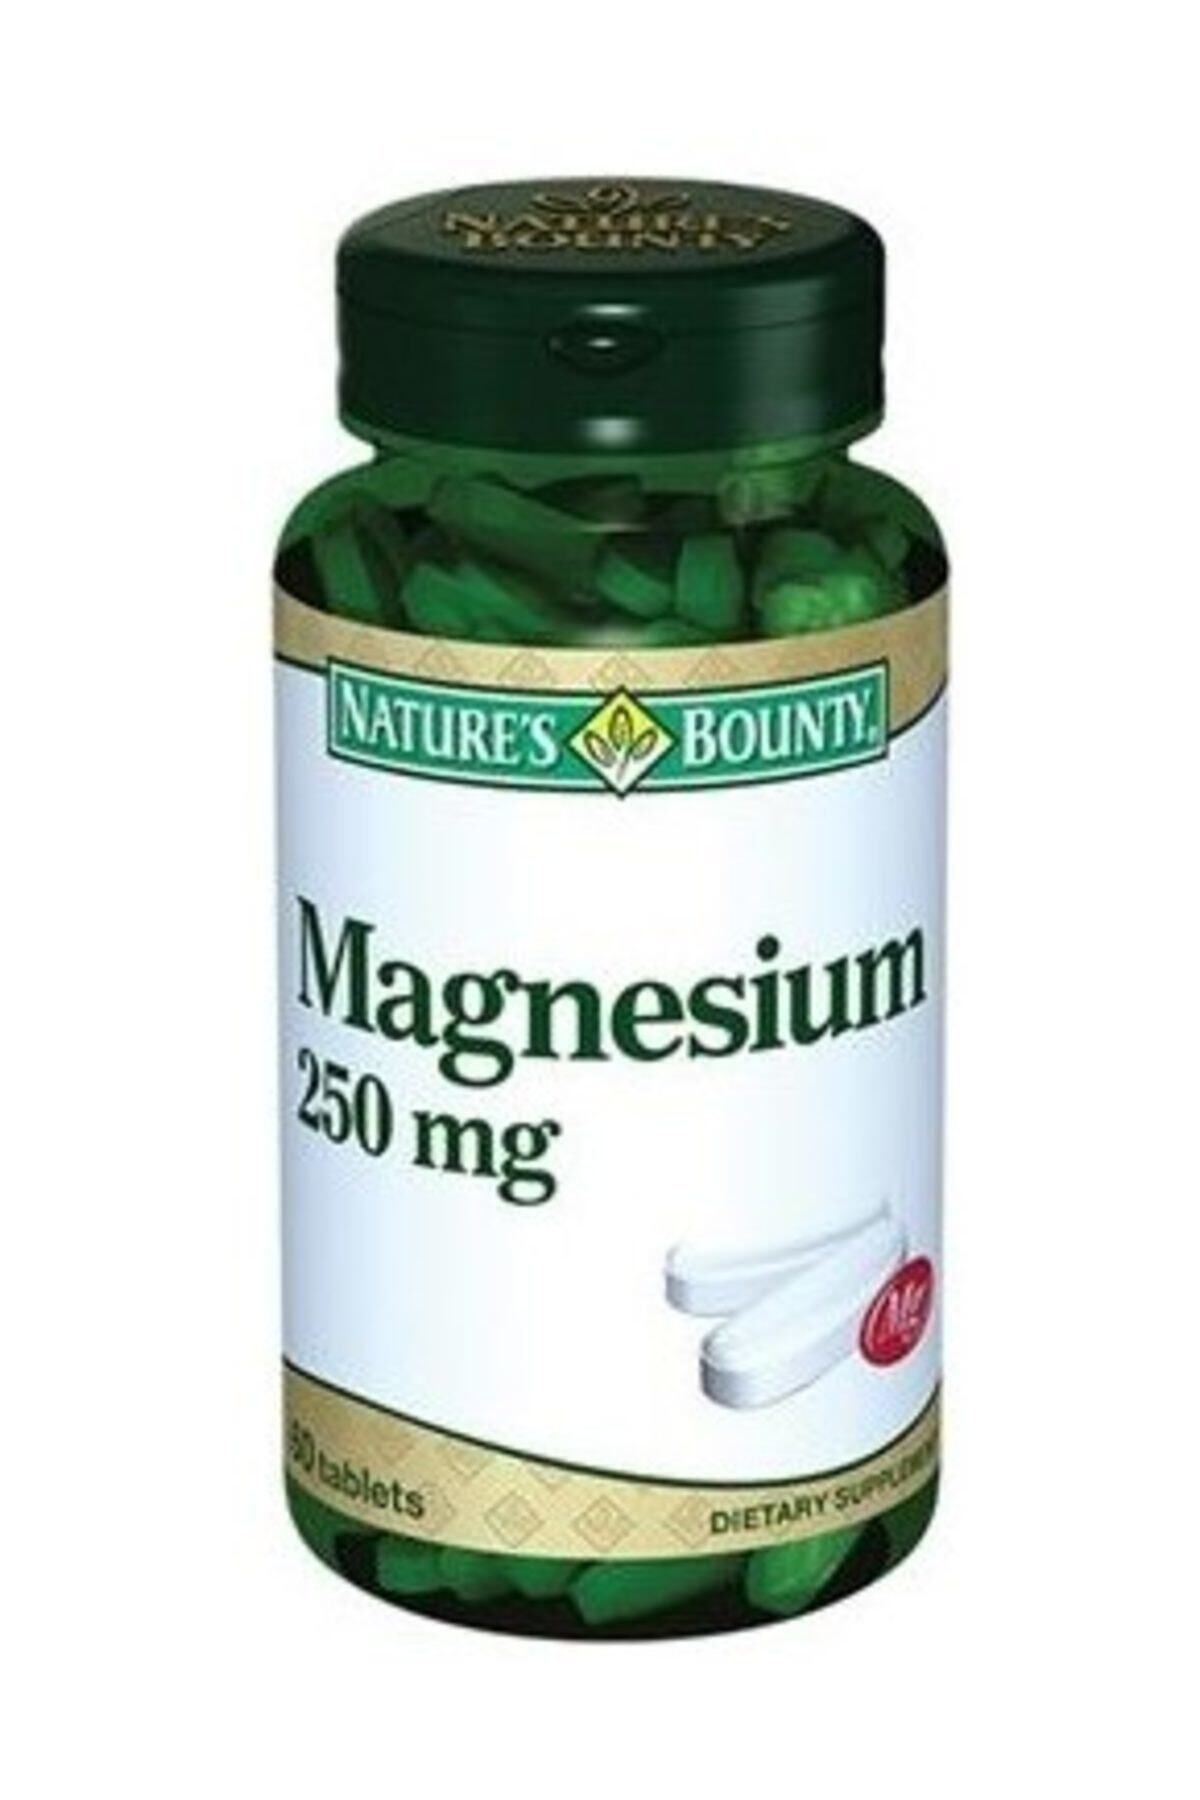 Natures Bounty Magnesium 250 mg 60 Tablet